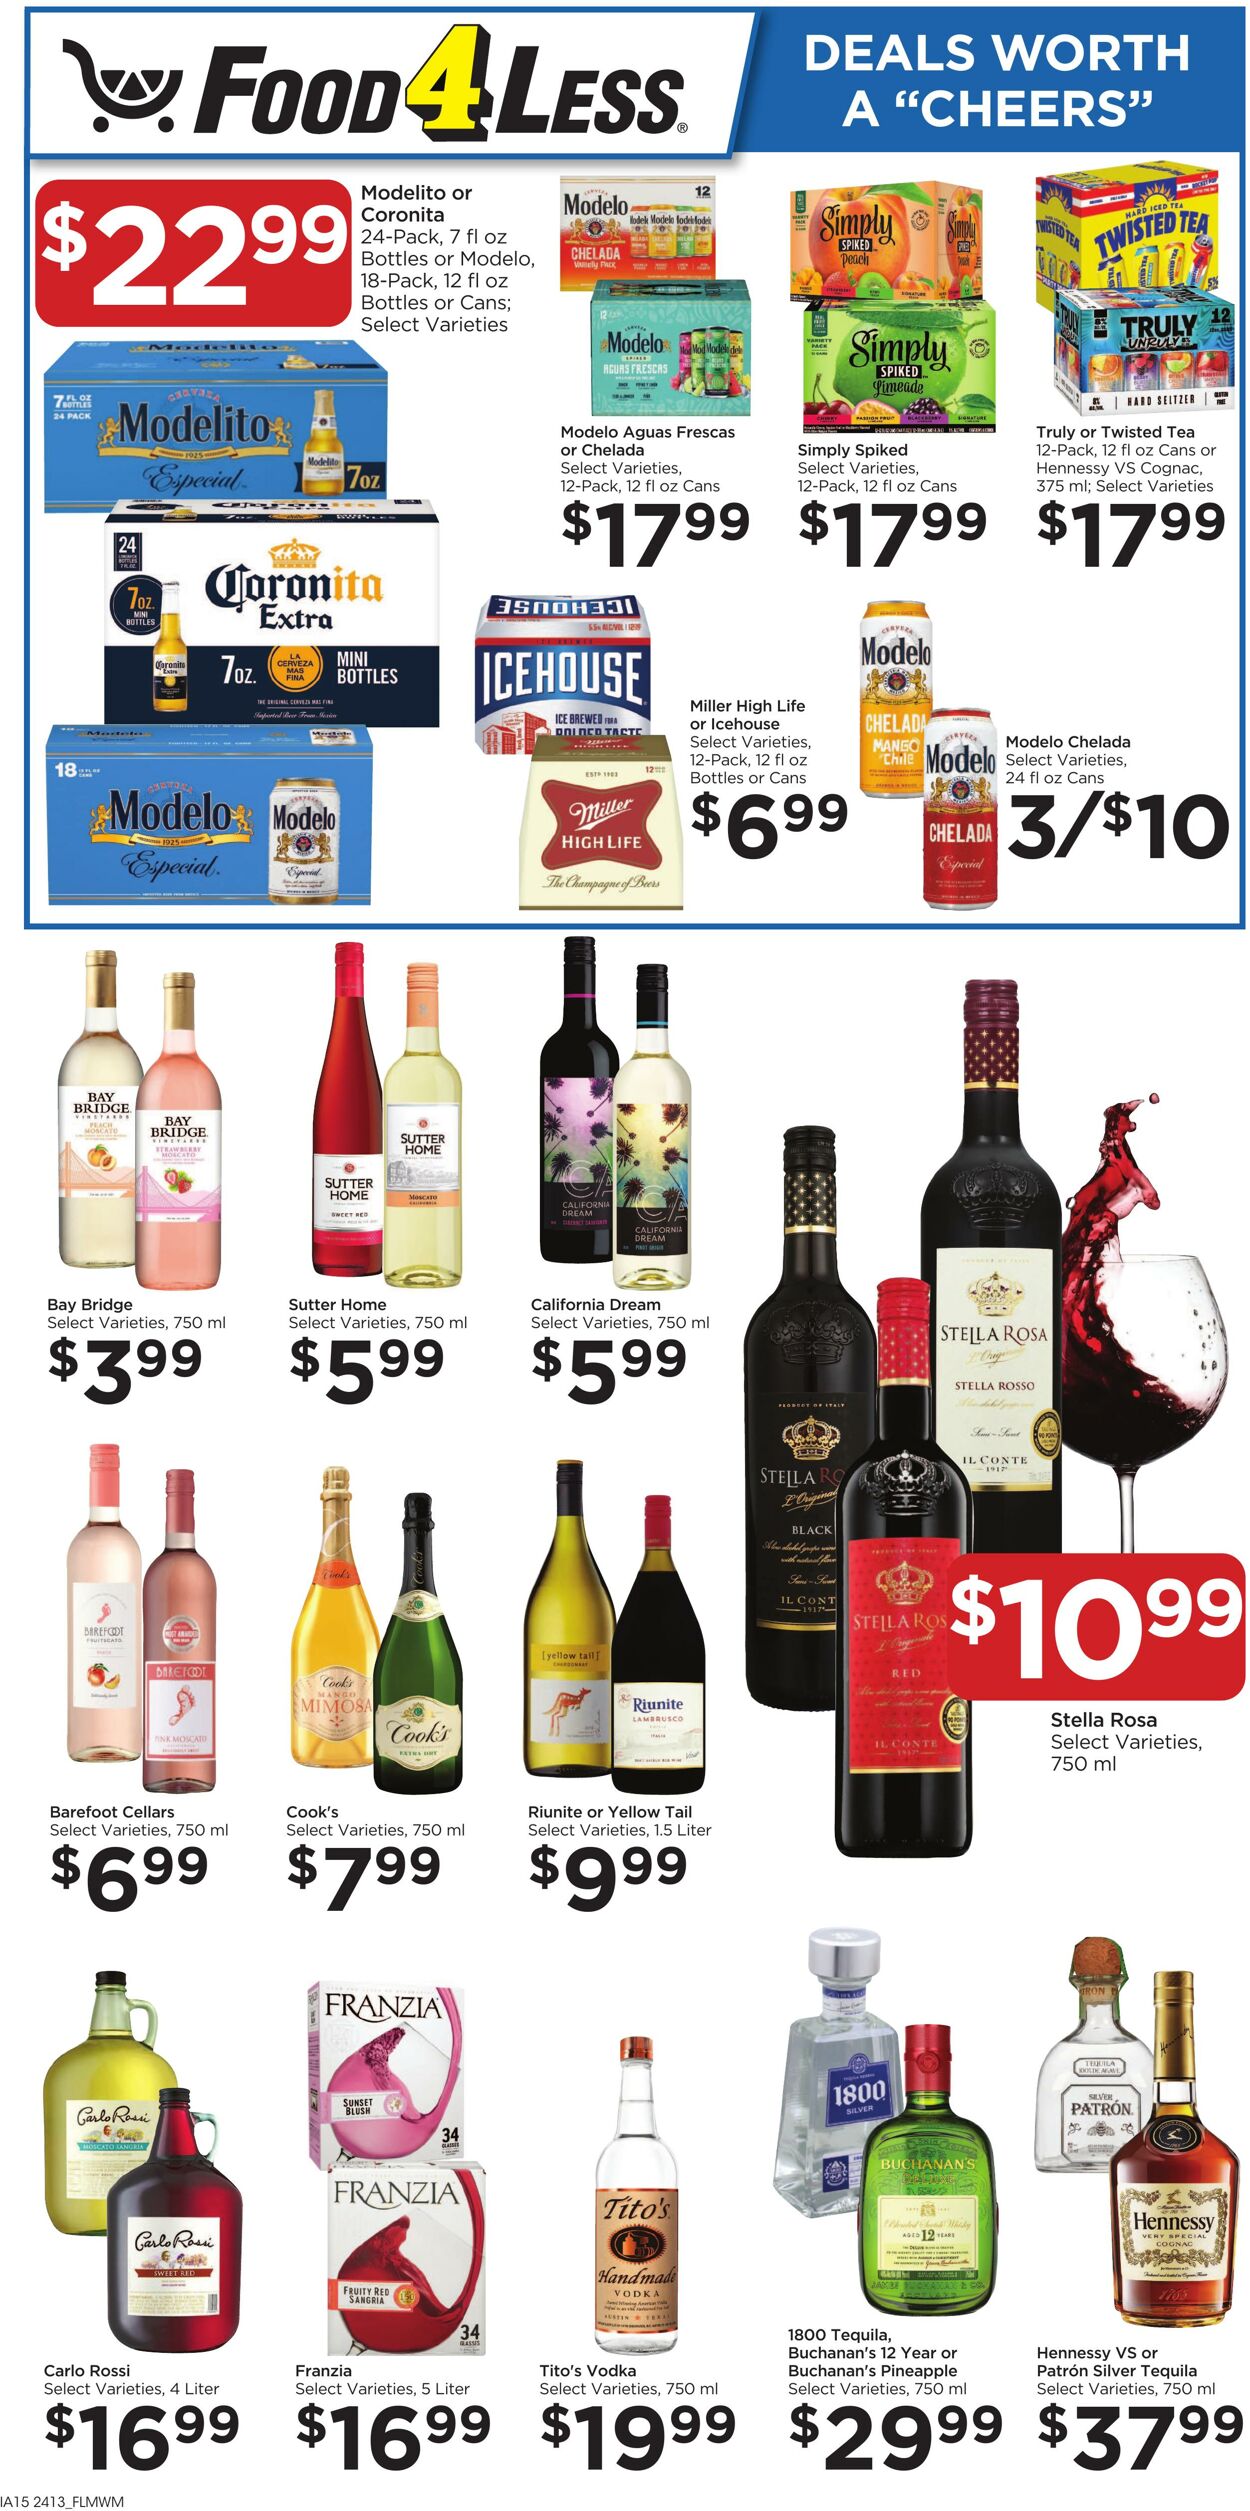 Food 4 Less Promotional weekly ads